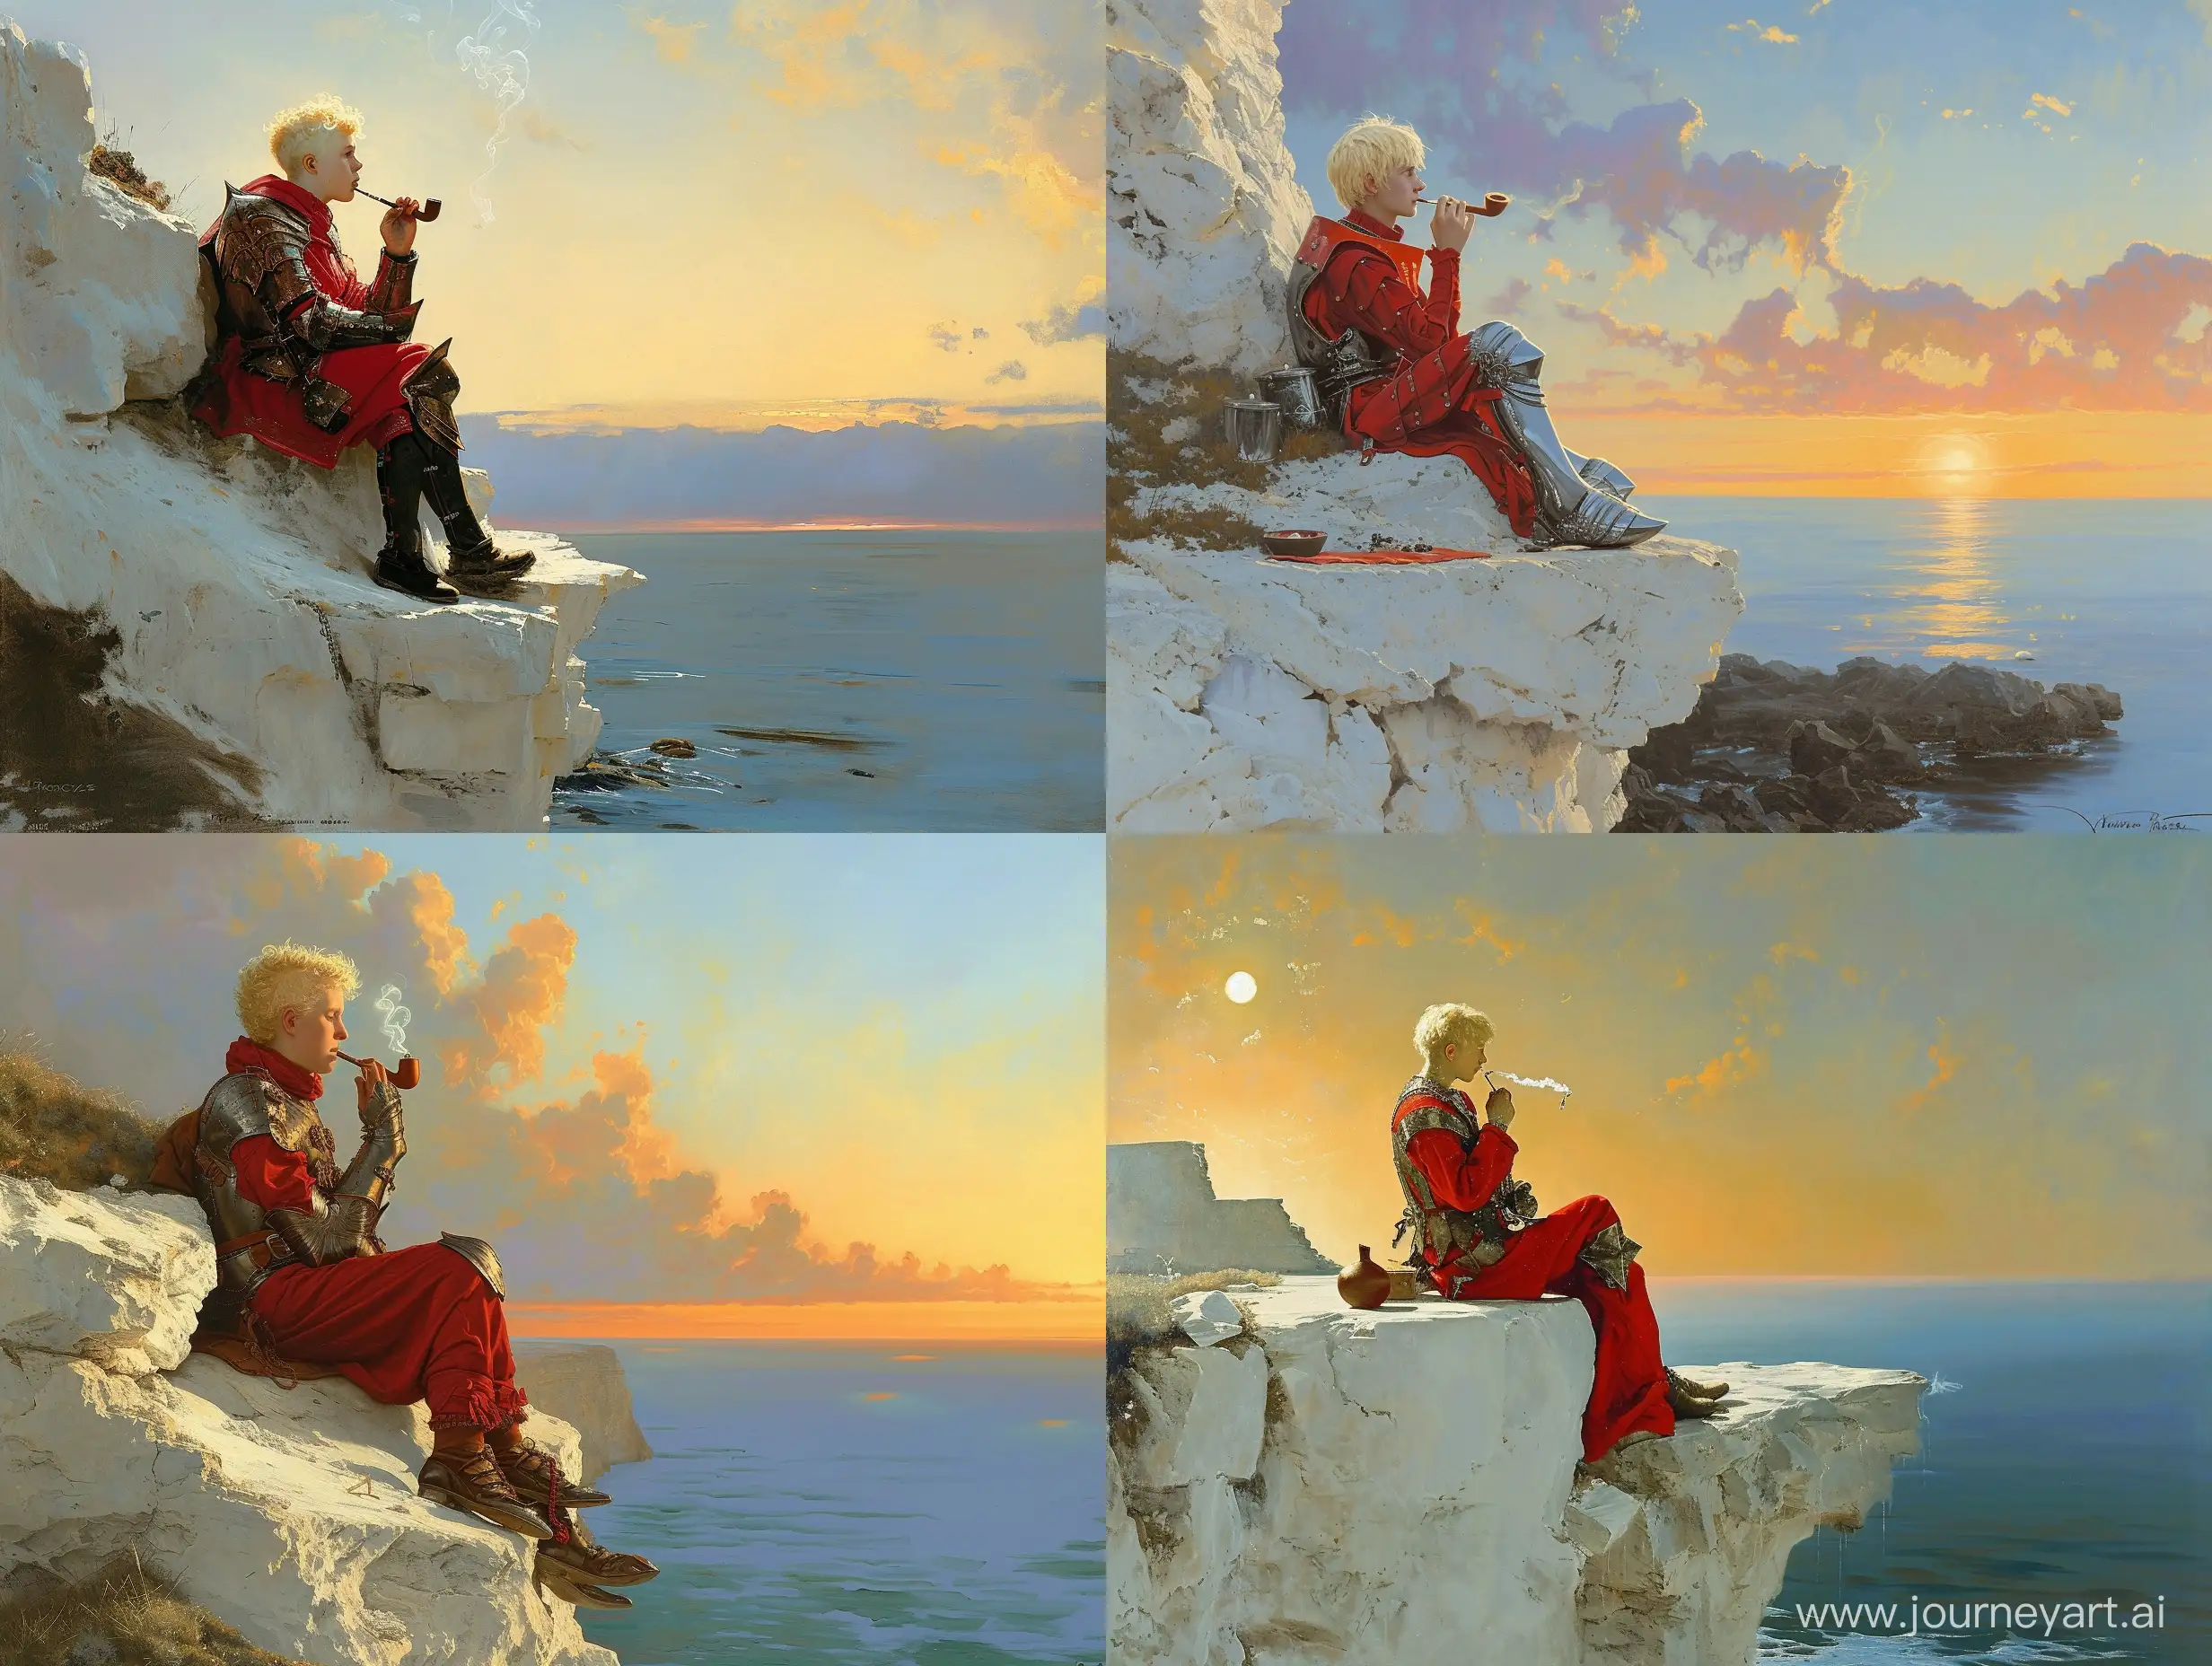 Norman Rockwell: Rocky landscape. A handsome blonde moppy hair 18 year old boy wearing red underneath immaculate medieval knight’s armor sits on an immaculate white stone cliff over the calm ocean at sunset. Smoking opium from a large pipe. Beautiful sky. Beautiful vast white stone cliff bluff over the ocean. Rembrandt van rijn, baroque